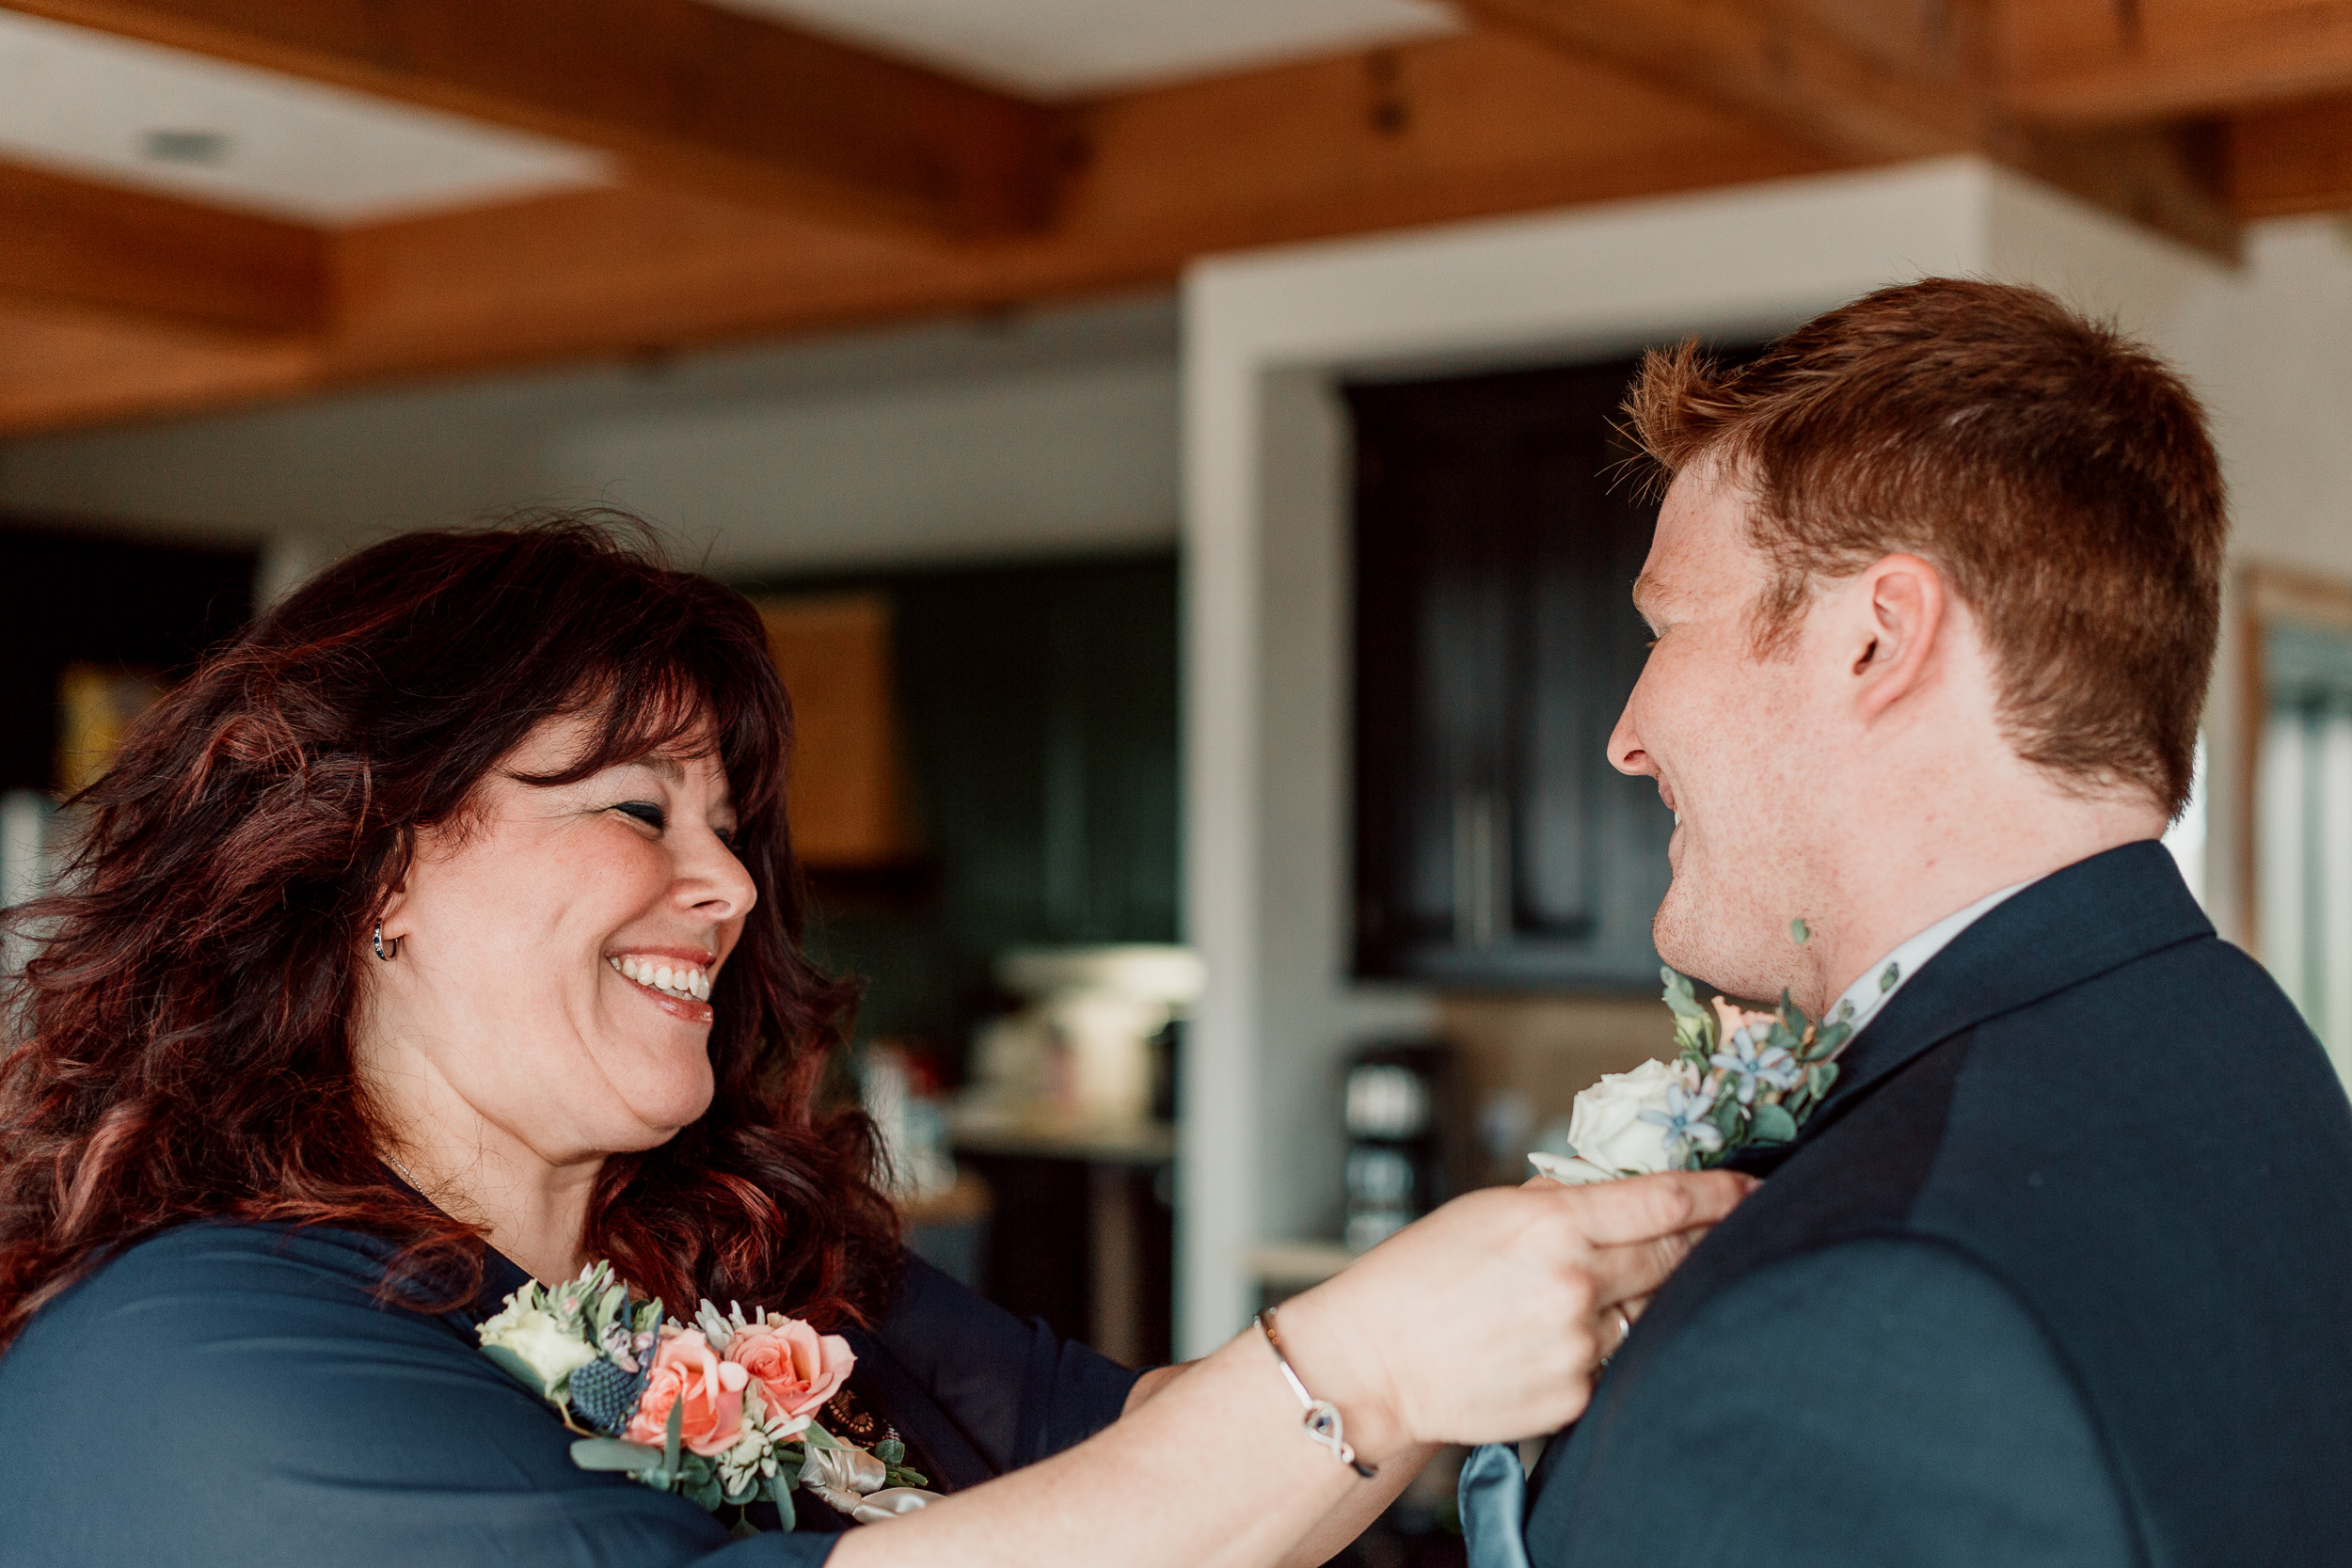 Groom getting ready | Groom's boutonniere | Galena Illinois Airbnb Wedding | Wedding Photographer | Eagle Ridge Galena Wedding | Outdoor Wedding Inspiration | Small Intimate Elopement Wedding